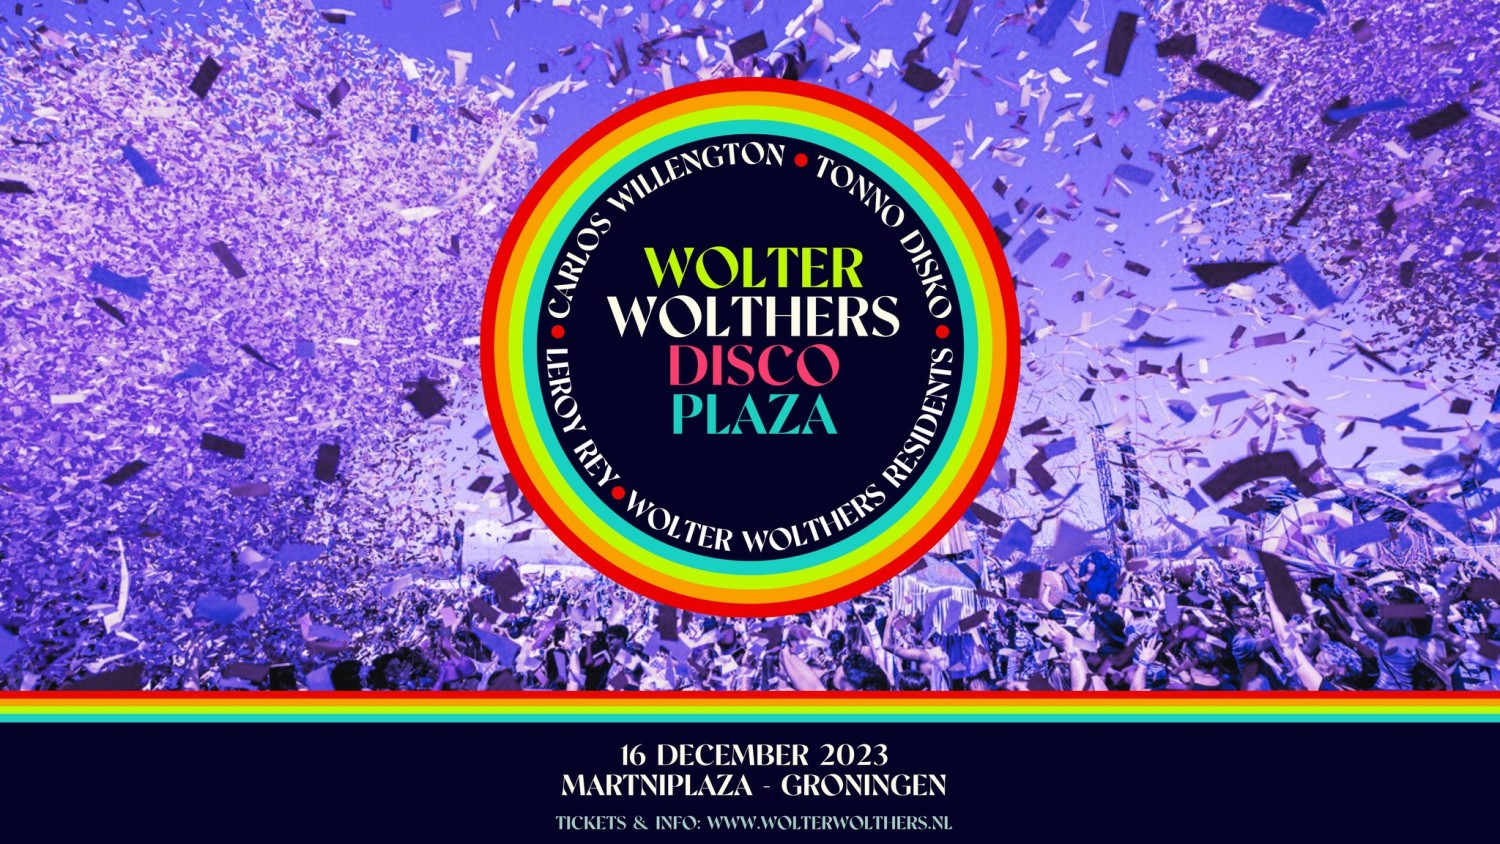 Wolter Wolthers Disco Plaza